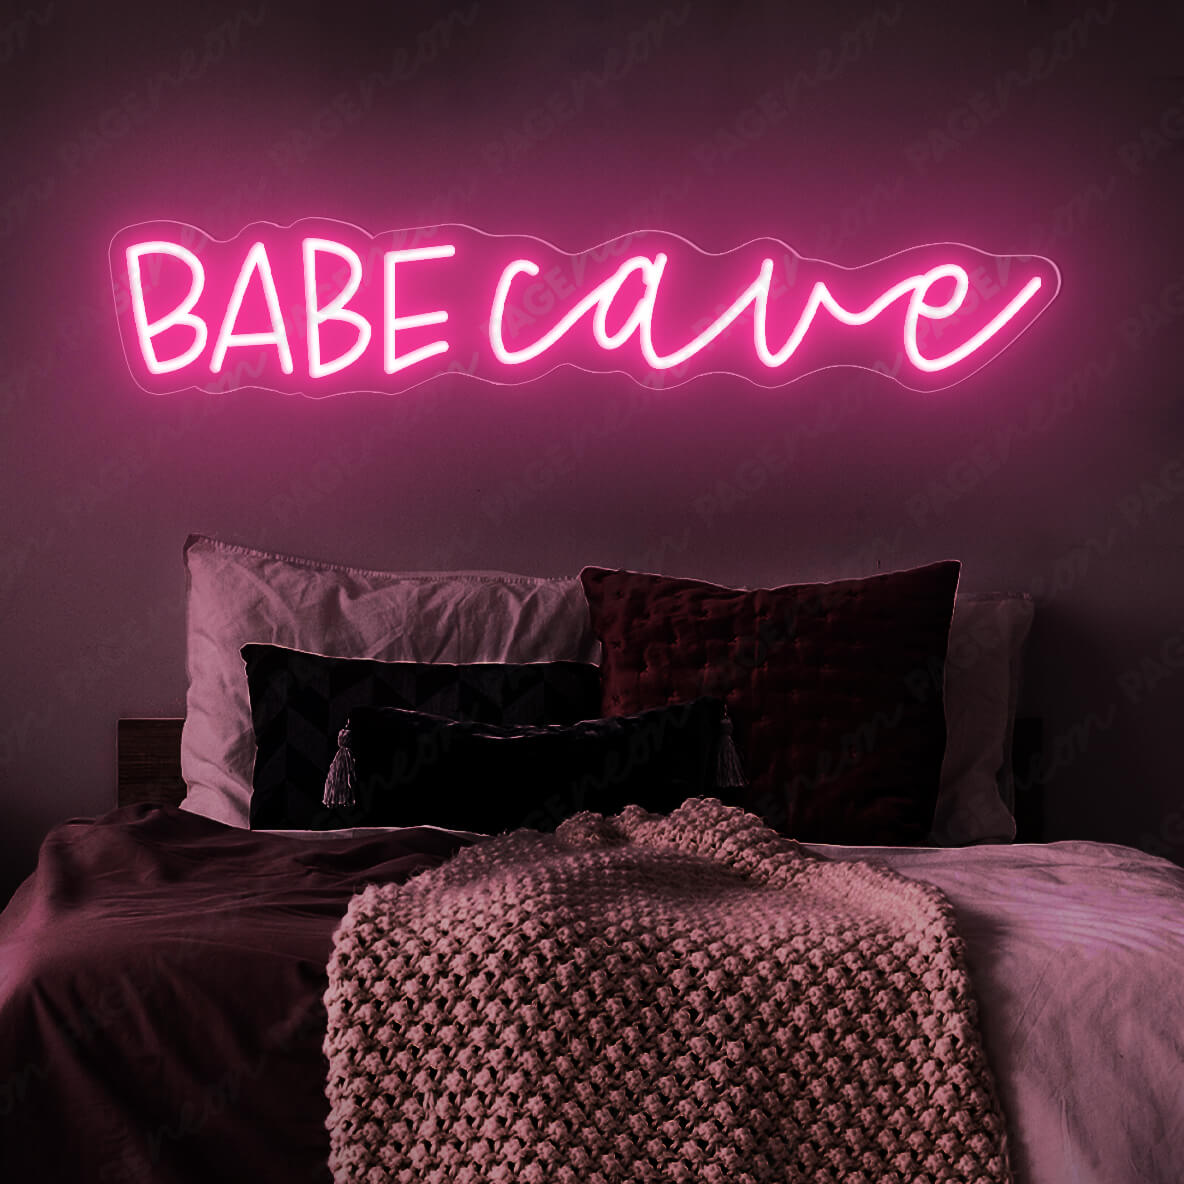 Babe Cave Neon Sign Led Light Pink